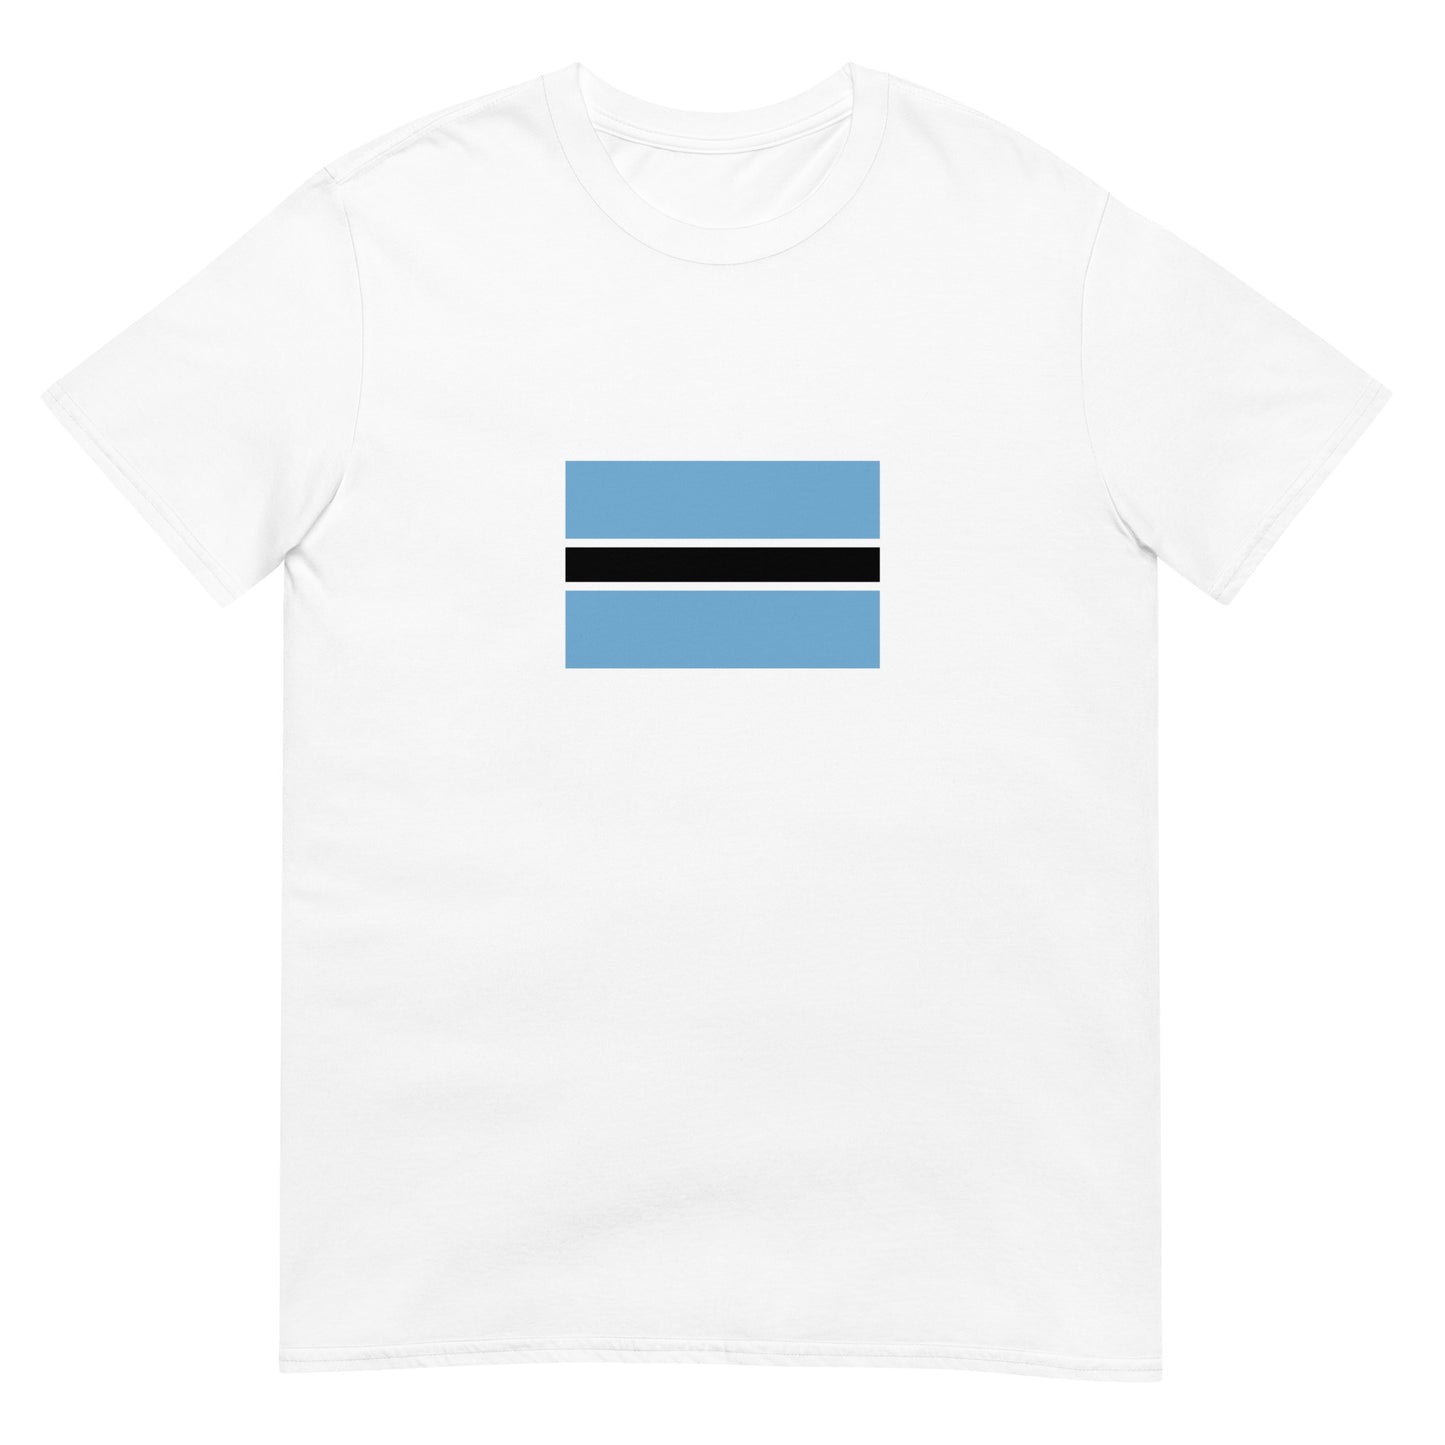 South Africa - Batswana people | Ethnic South Africa Flag Interactive T-shirt